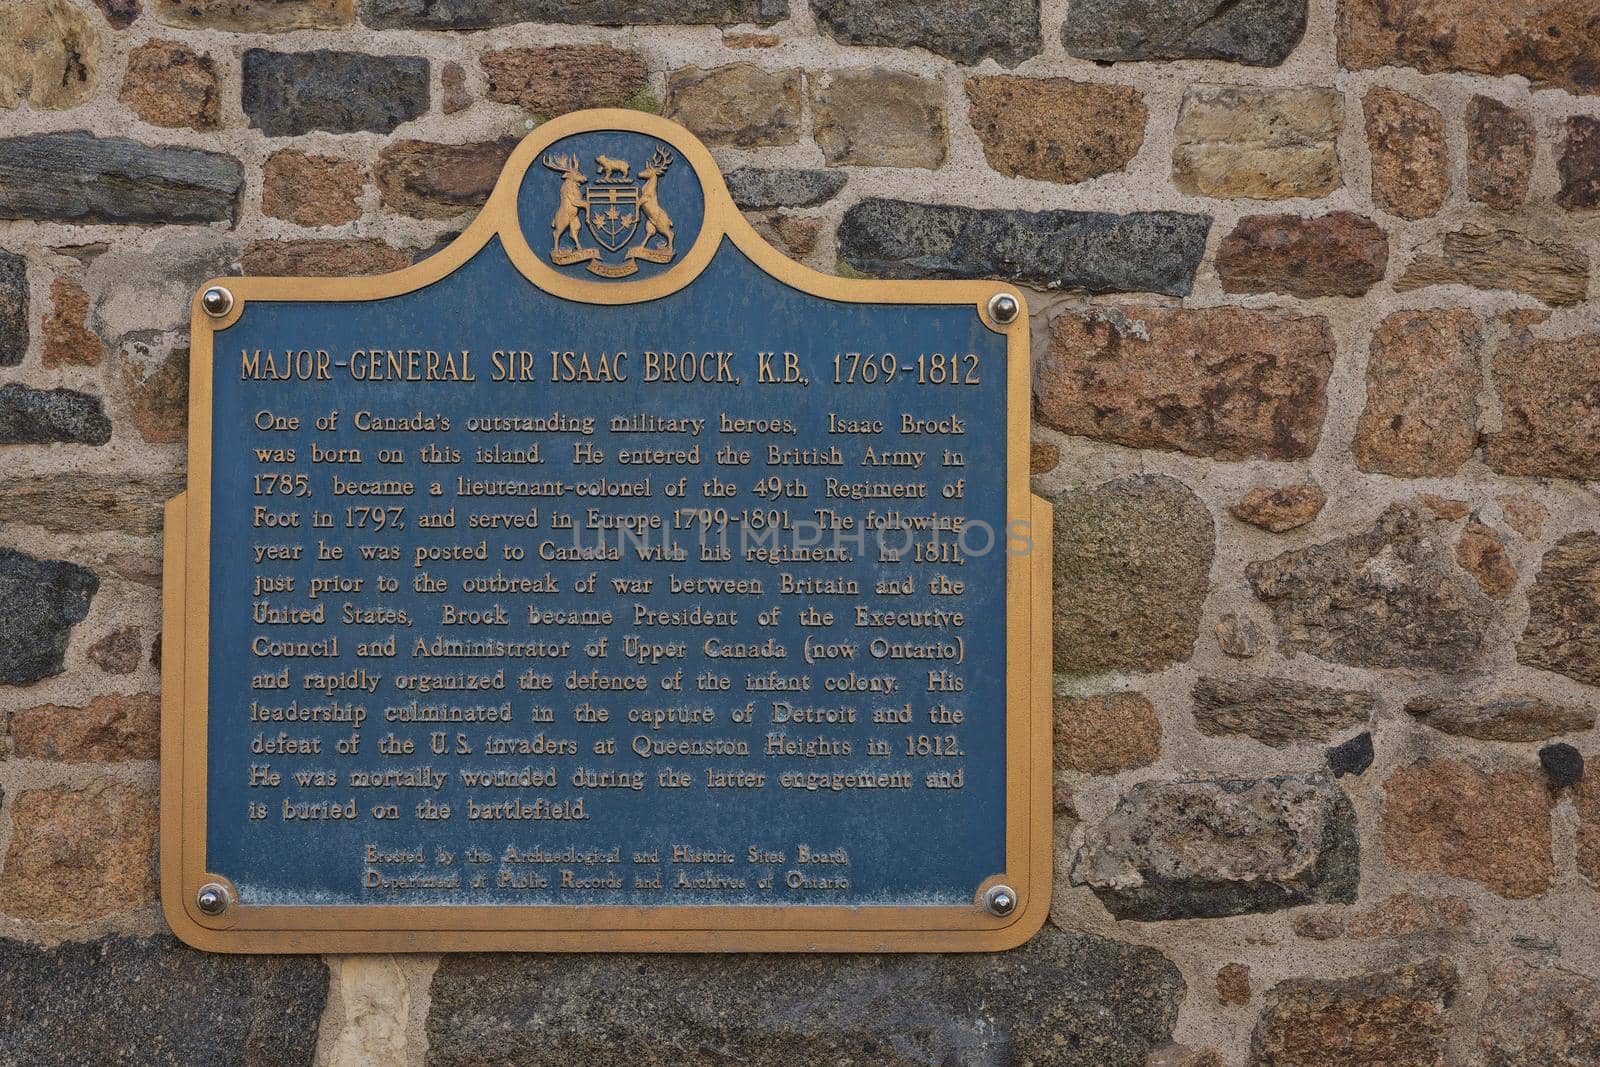 ST. PETER PORT, GUERNSEY, CHANNEL ISLANDS - AUGUST 16, 2017: Dedication to Major-General Isaac Brock commemorating his life as a local resident ofmSt. Peter Port in Guernsey by wondry